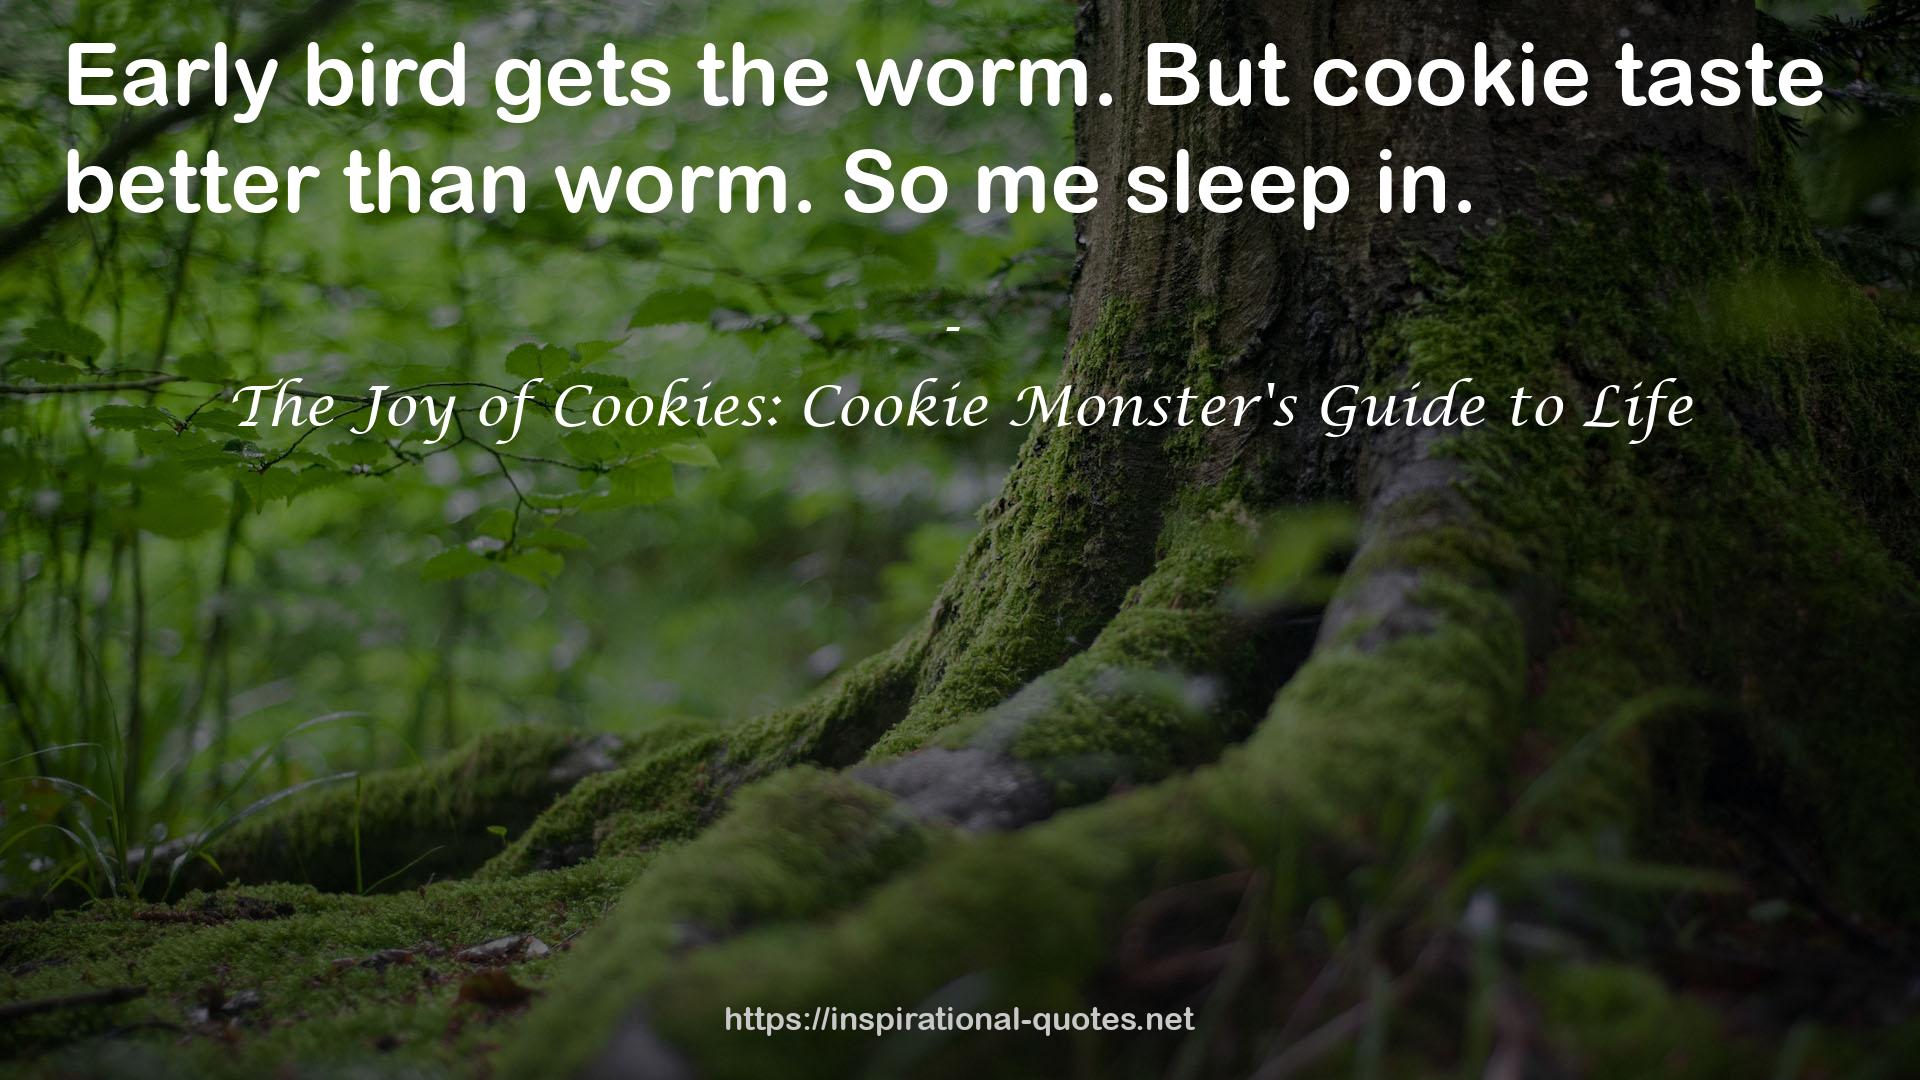 The Joy of Cookies: Cookie Monster's Guide to Life QUOTES